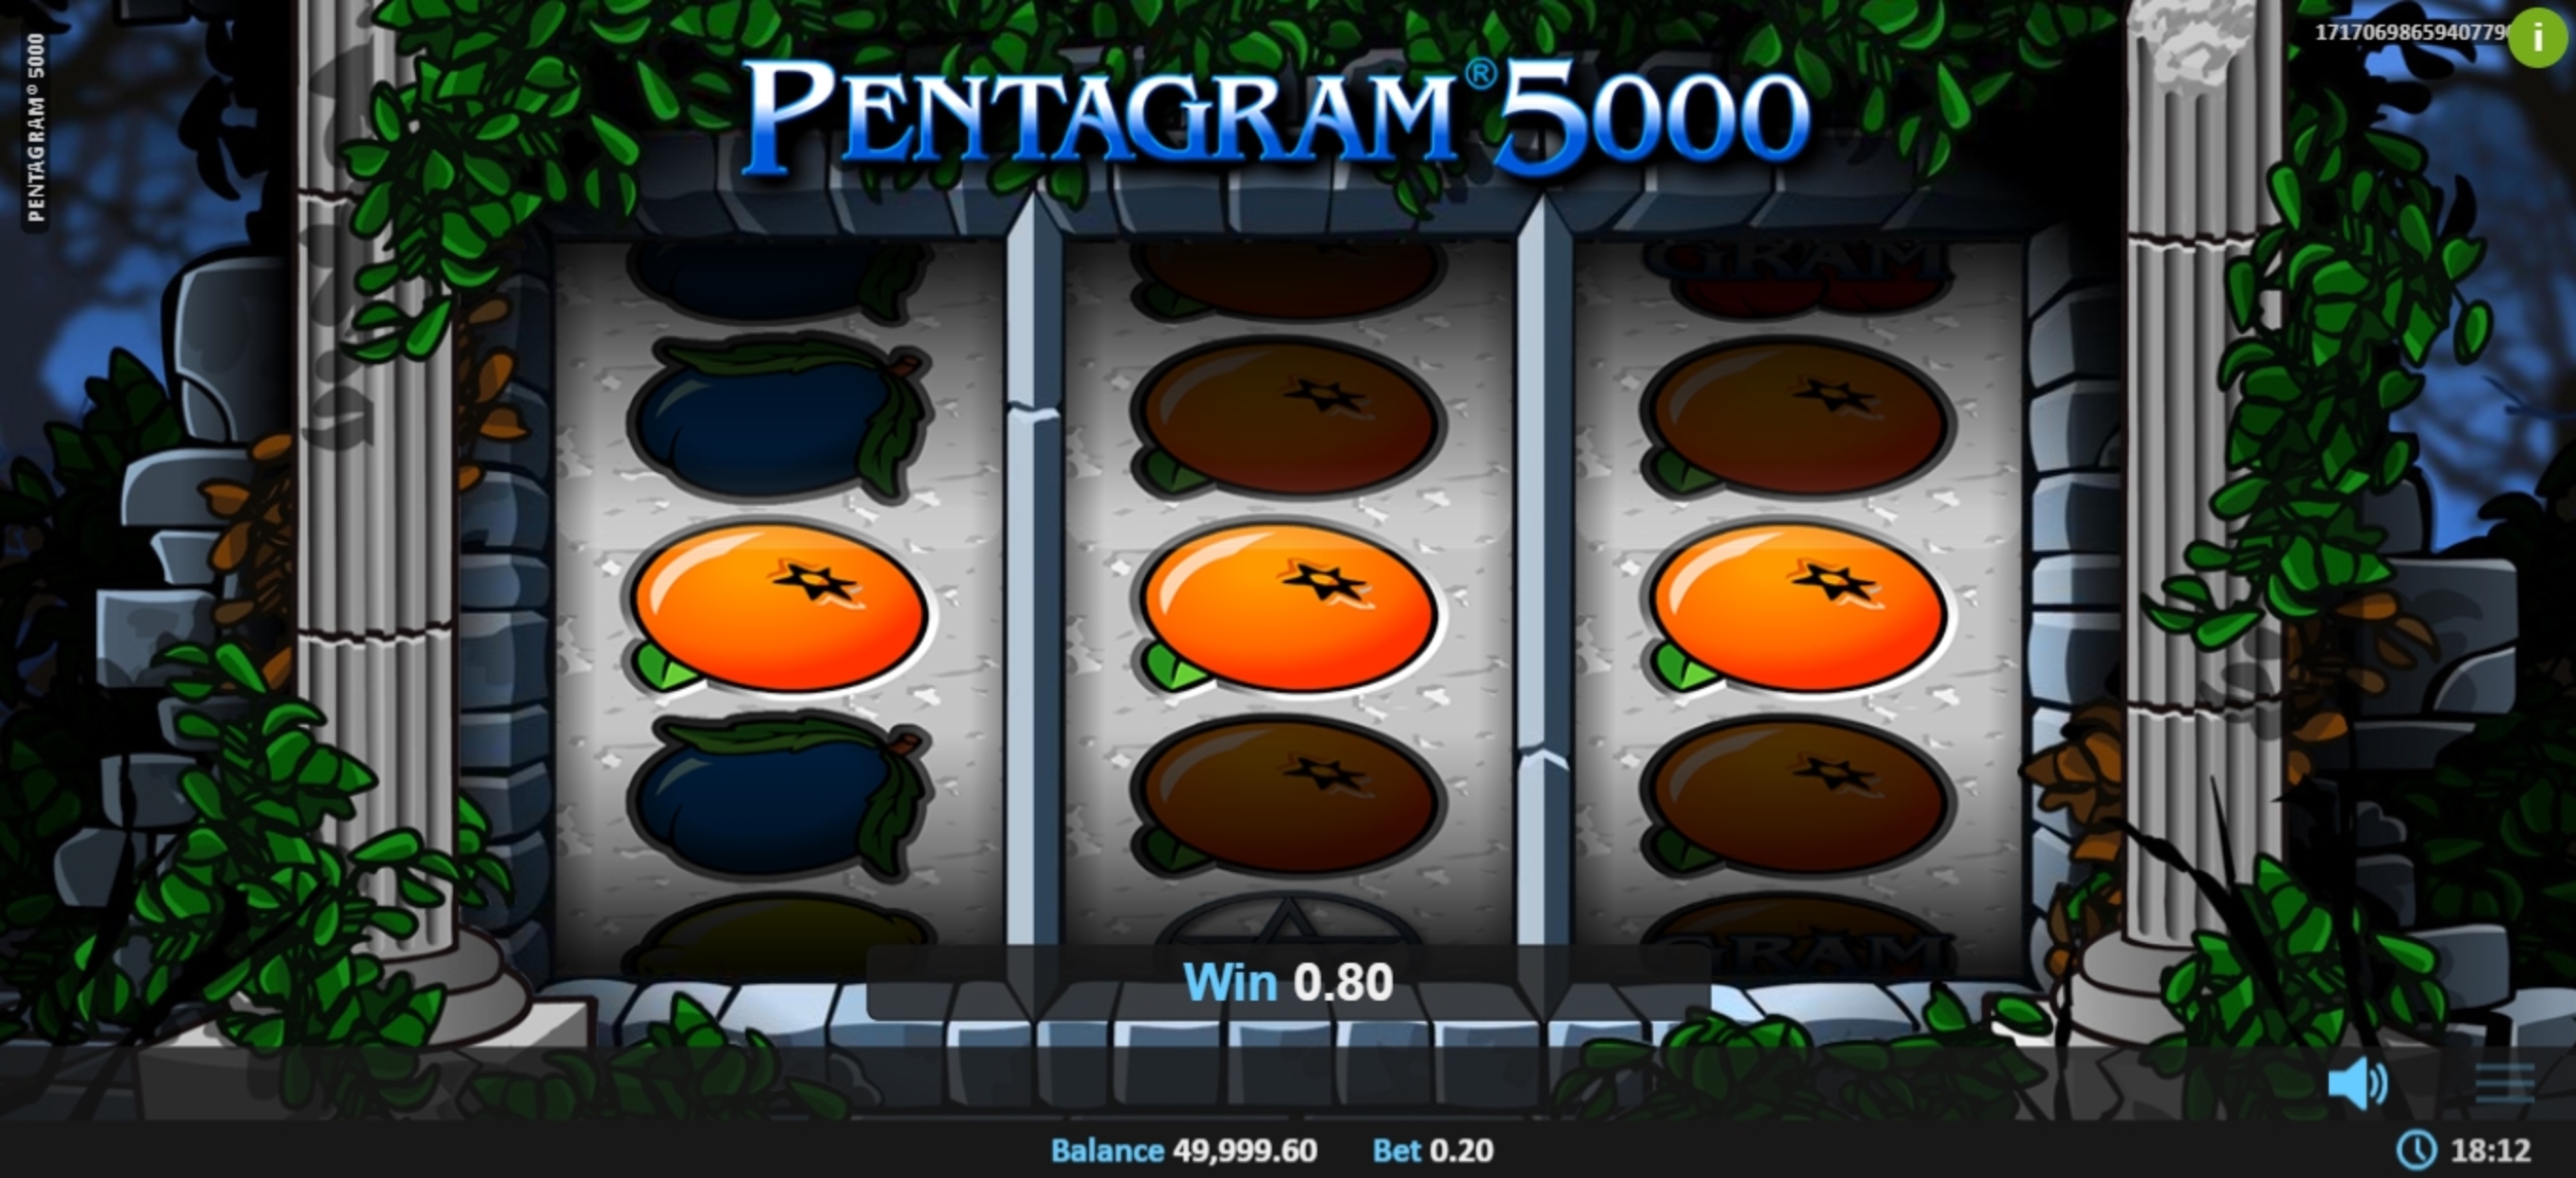 Win Money in Pentagram 5000 Free Slot Game by Realistic Games